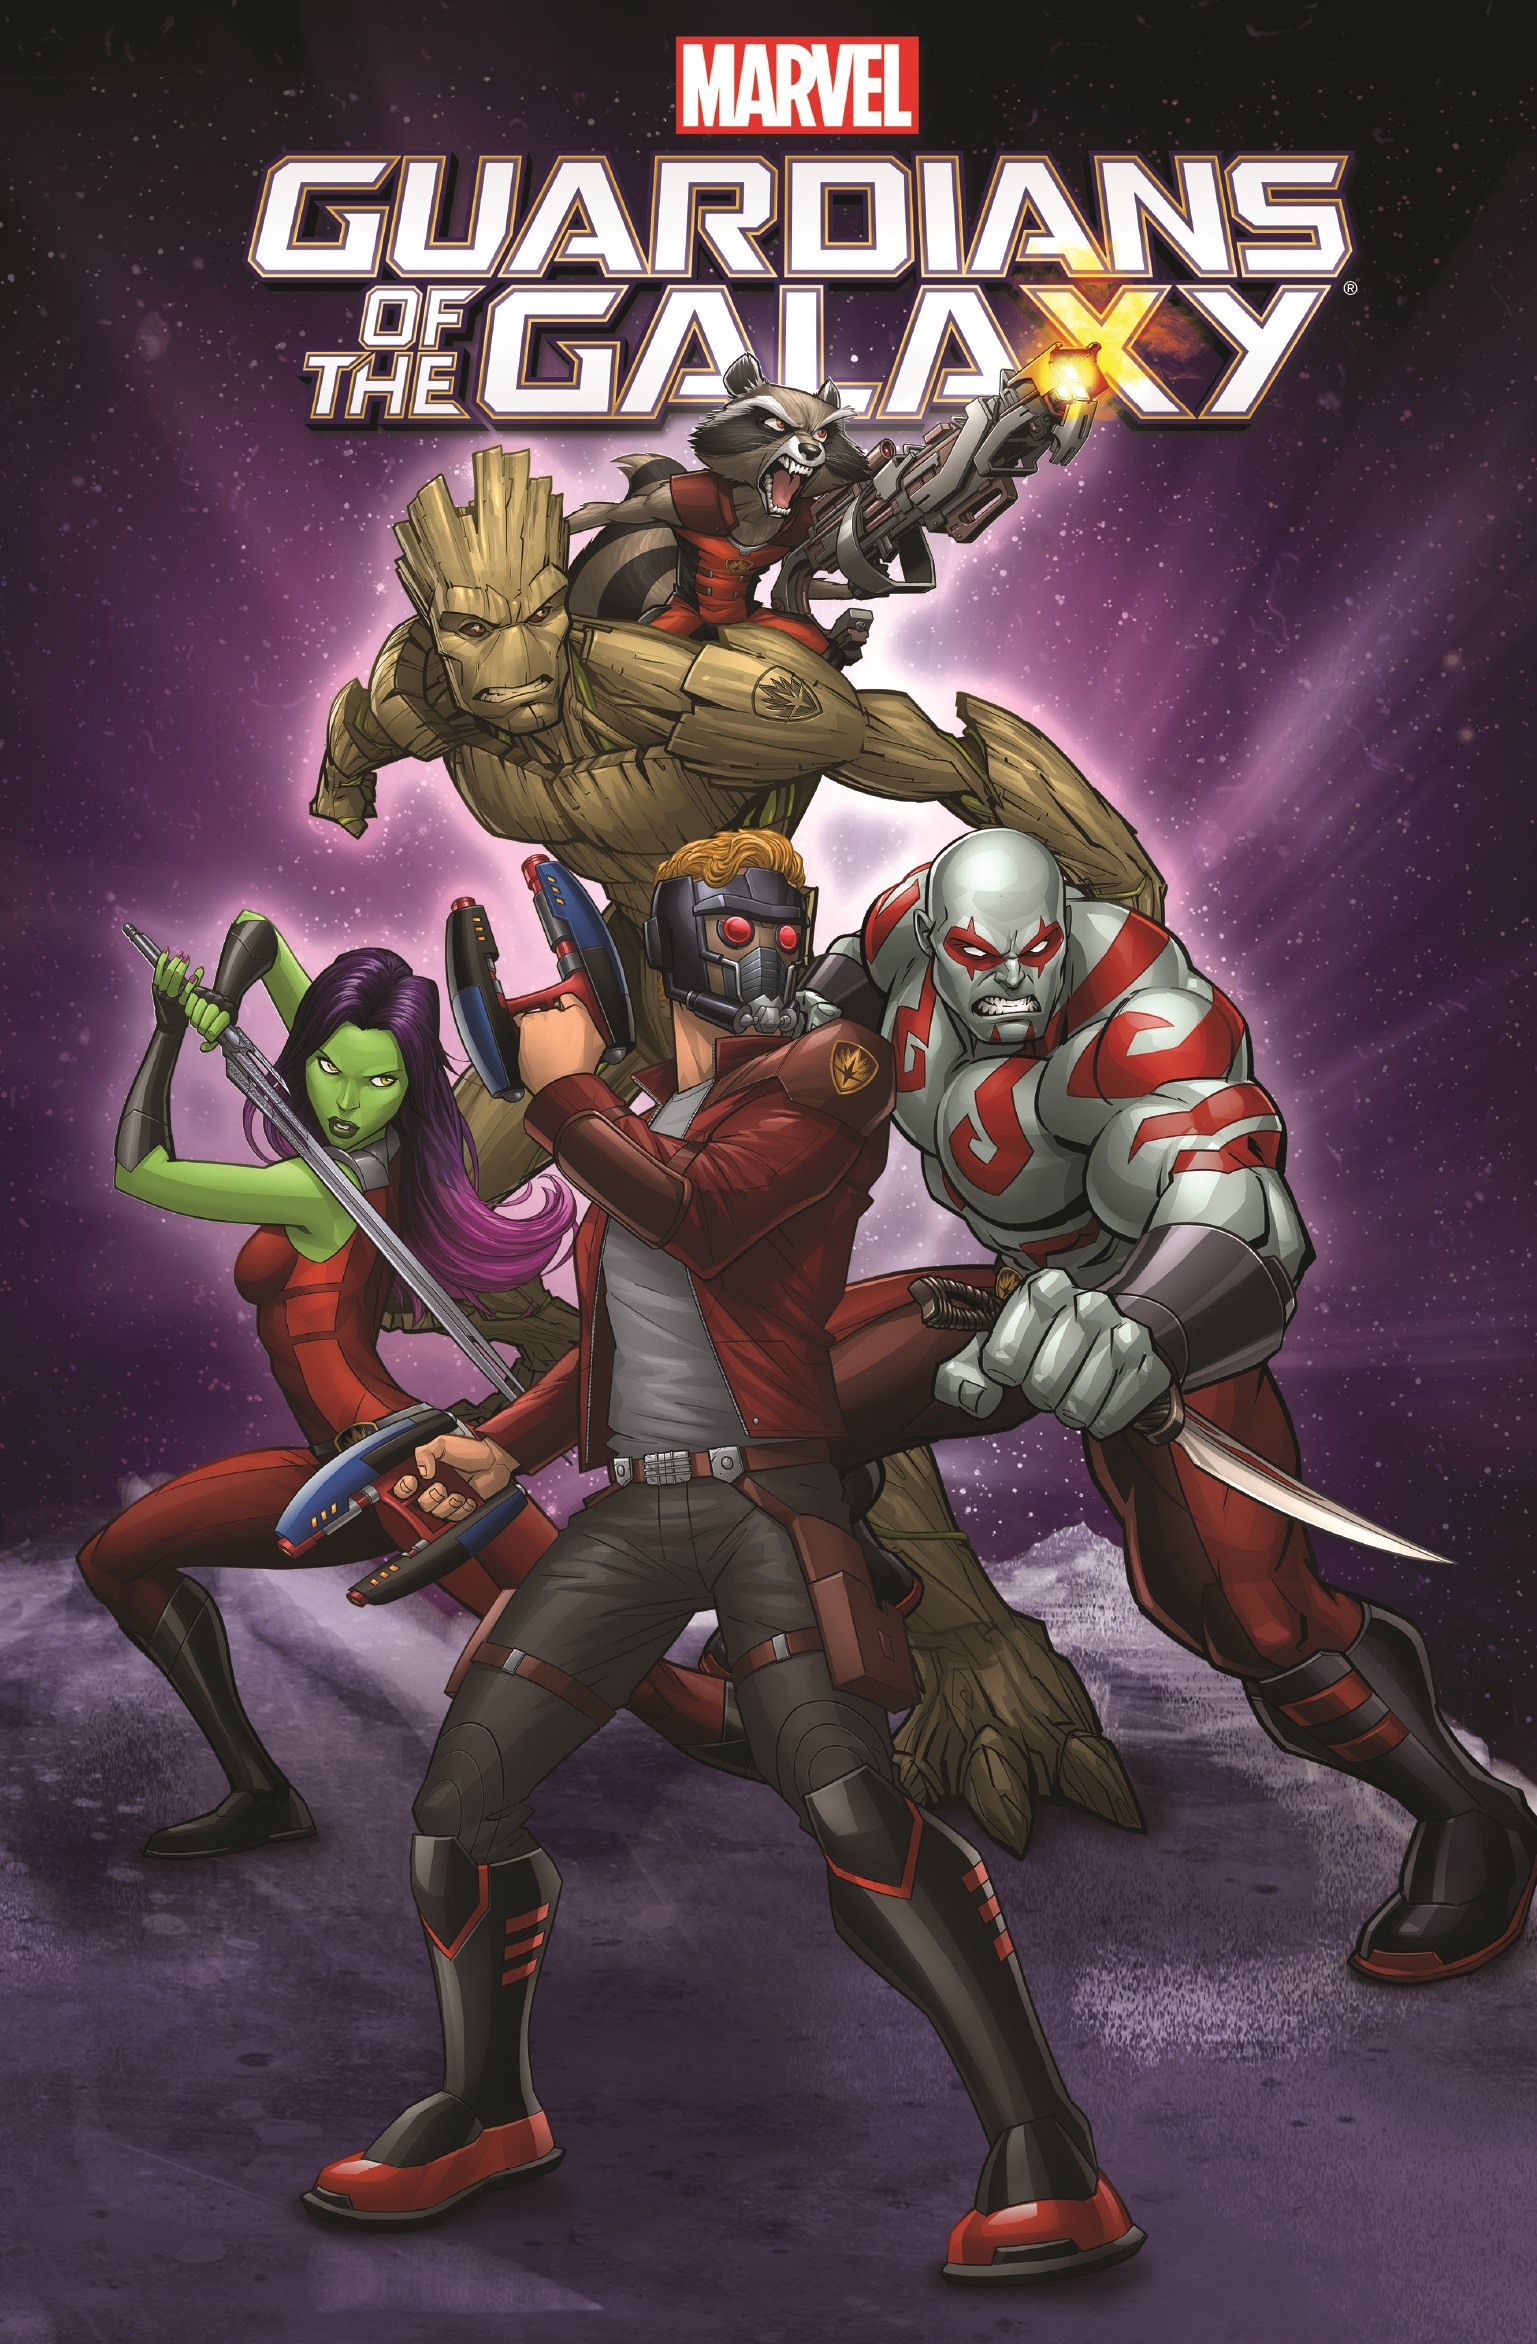 MARVEL UNIVERSE GUARDIANS OF THE GALAXY VOL. 5 DIGEST (Trade Paperback)